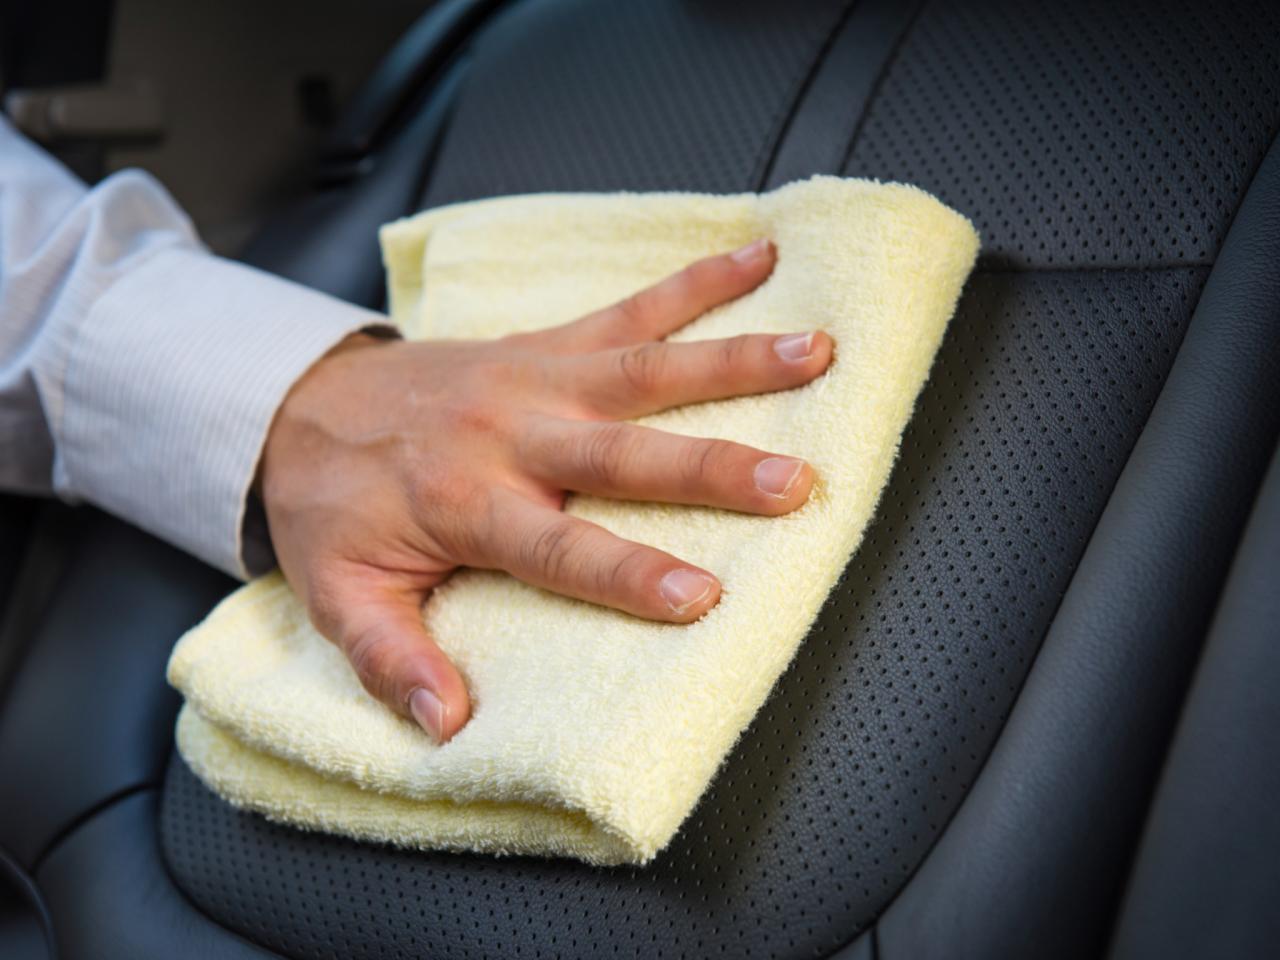 How To Clean Leather Car Seats, How To Remove Old Stains From Leather Car Seats